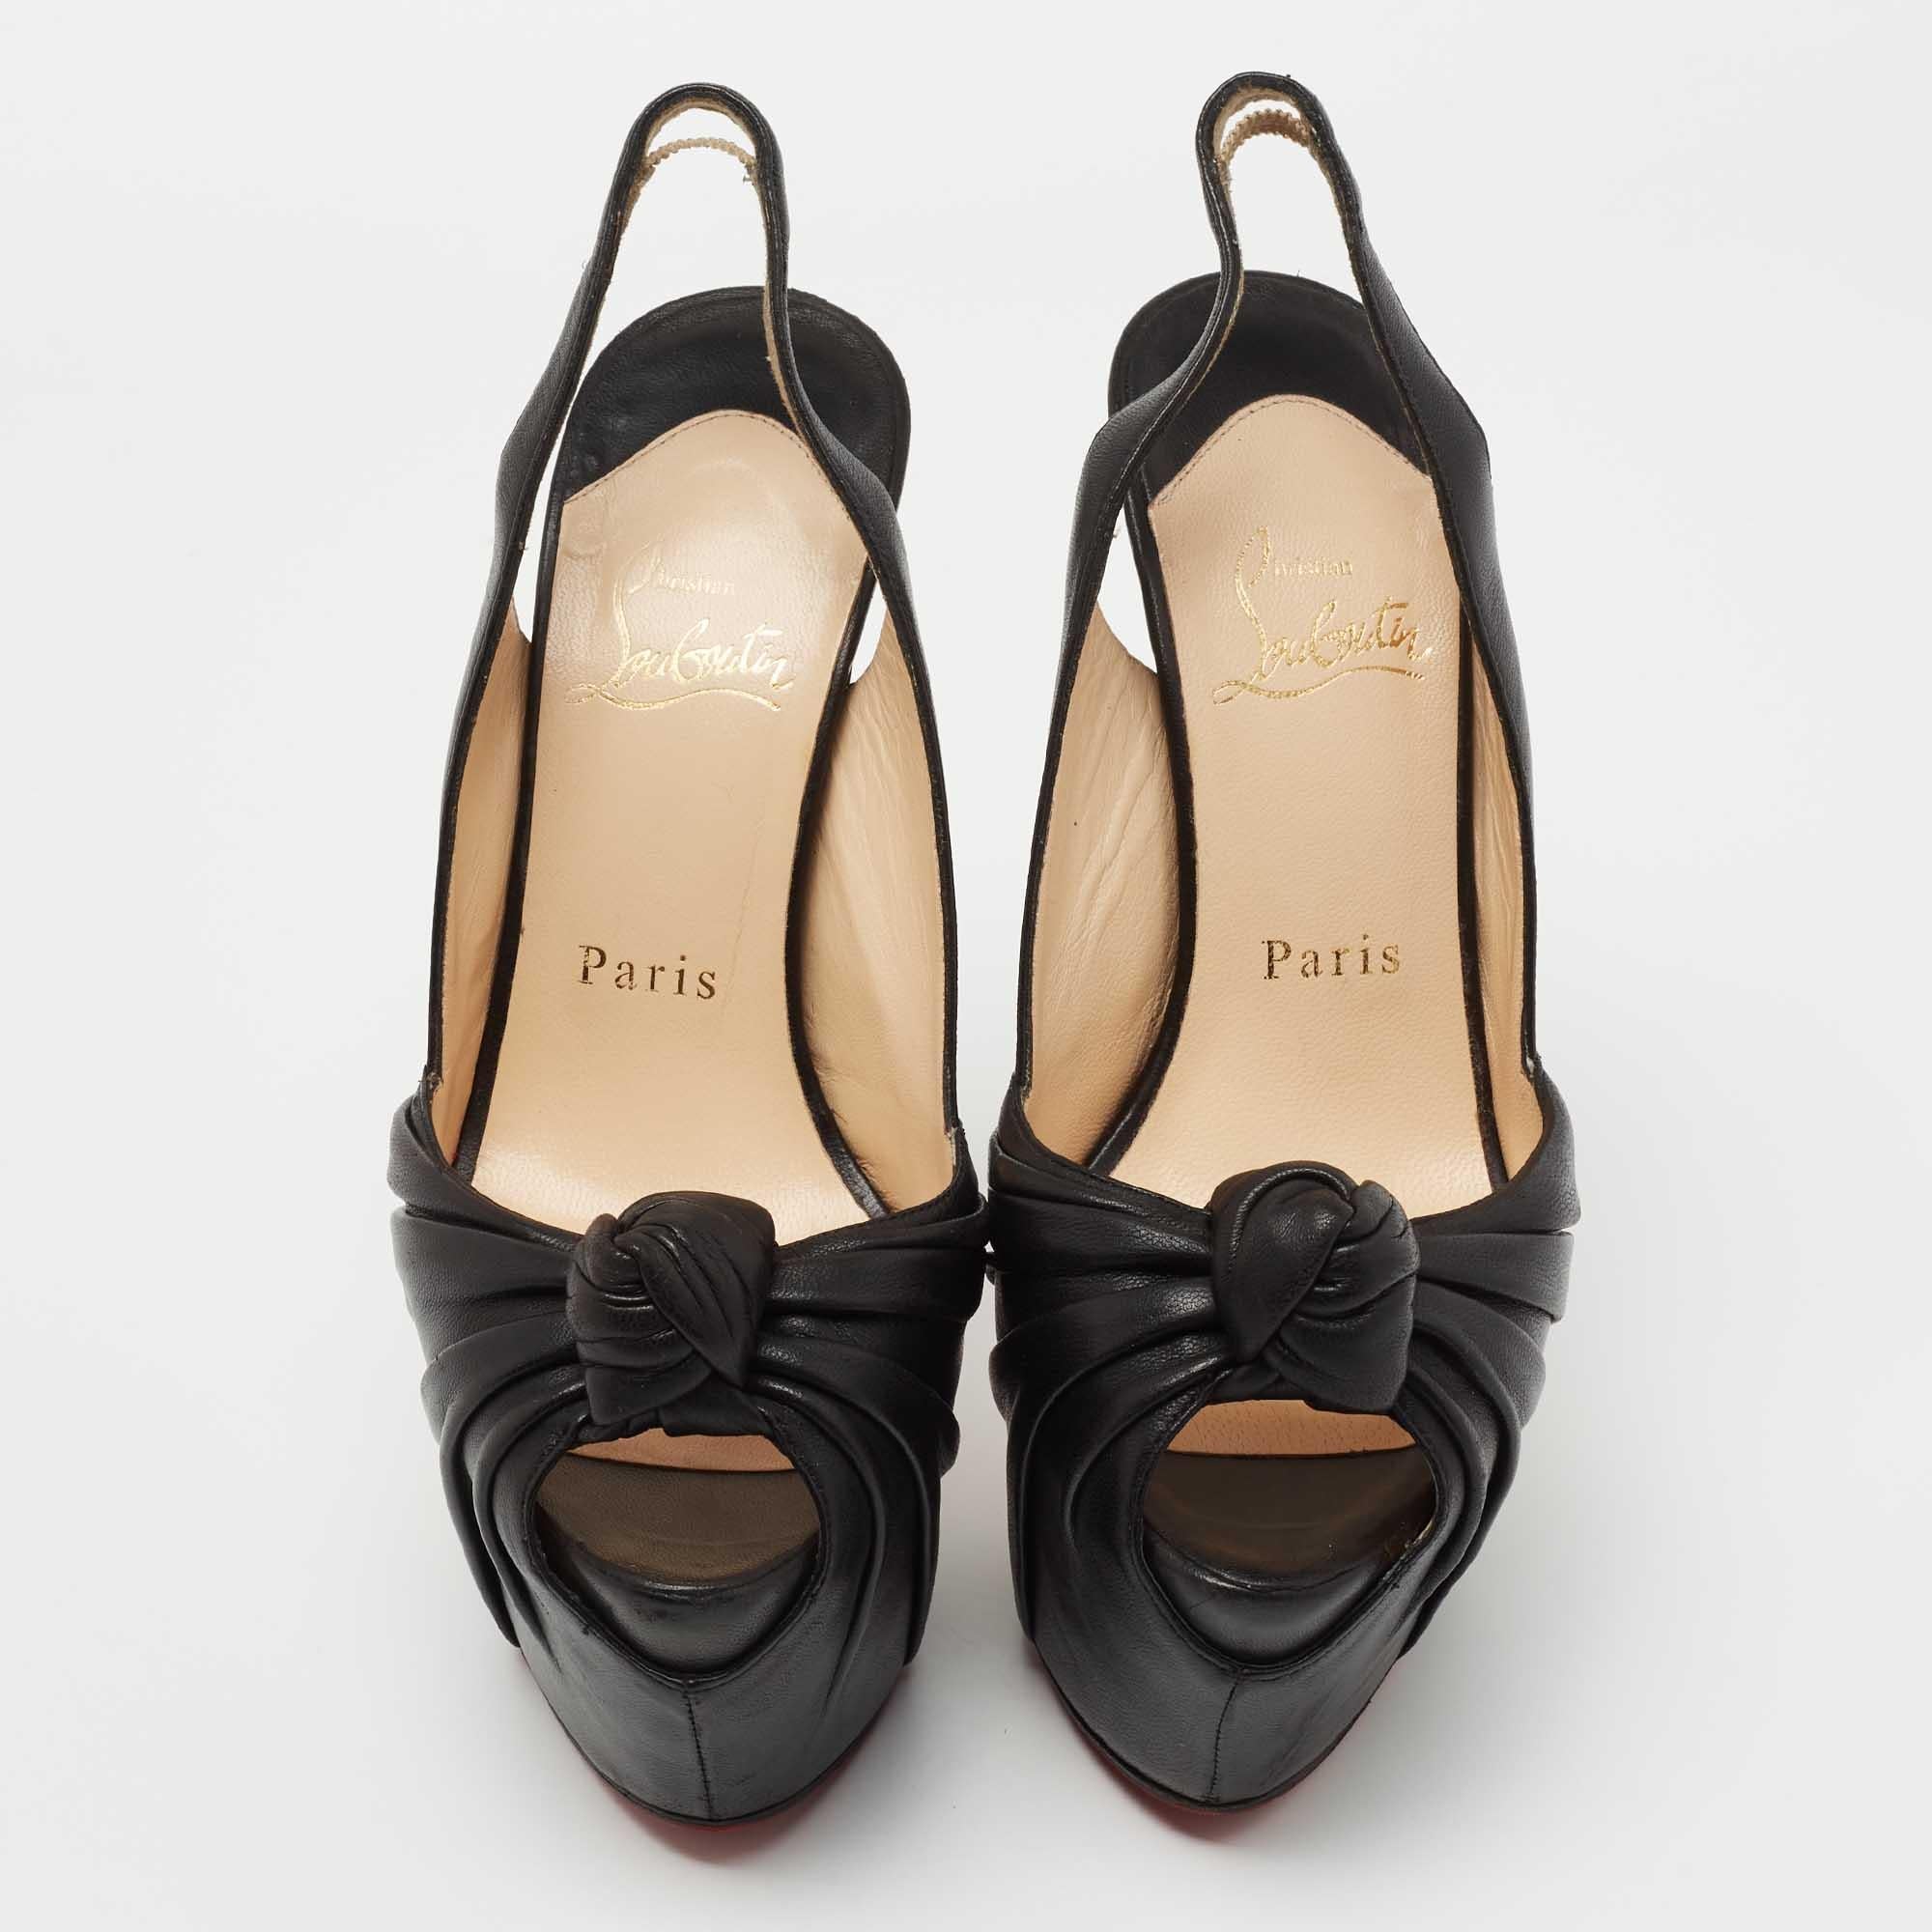 Exhibit an elegant style with this pair of pumps. These elegant shoes are crafted from quality materials. They are set on durable soles and sleek heels.

Includes
Original Dustbag, Branded Box